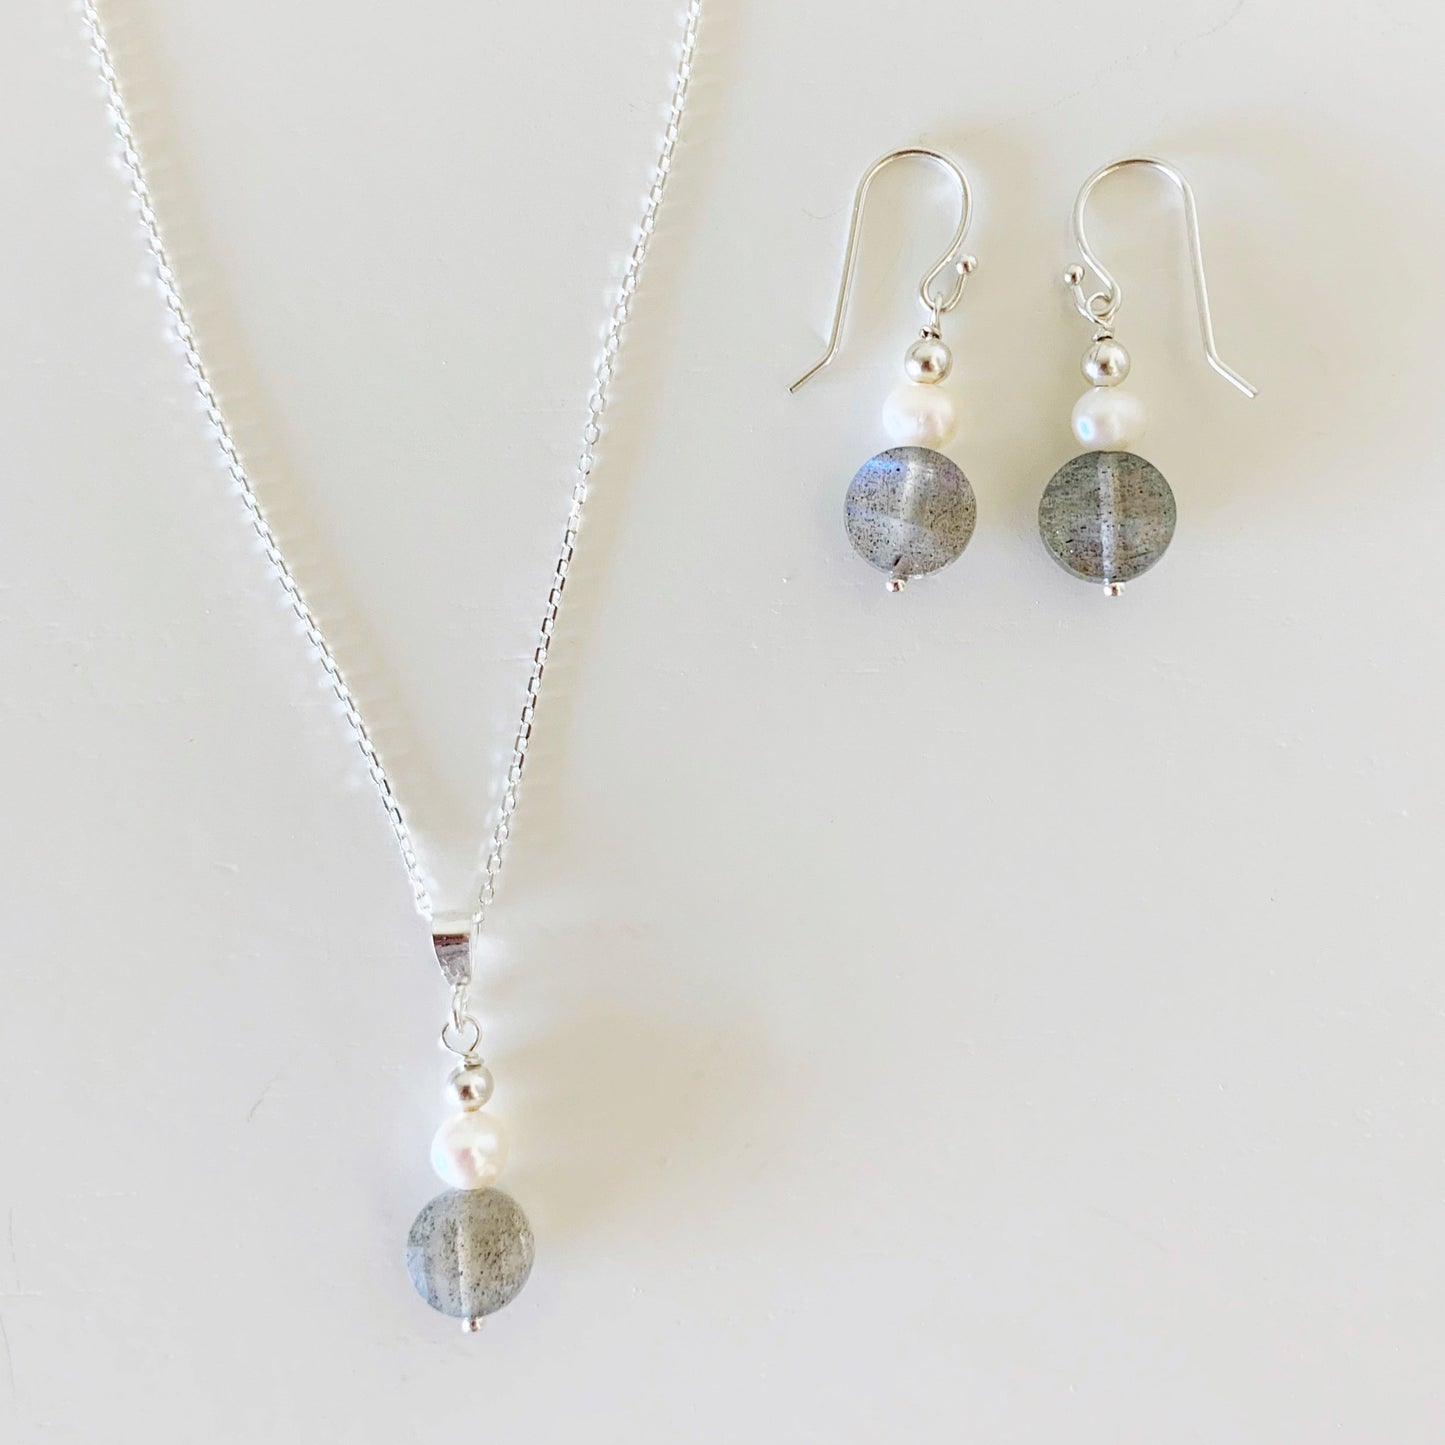 The arctic pendant necklace and earrings by mermaids and madeleines are created with small freshwater pearls, faceted labradorite coins and sterling silver chain and findings. this set is photographed on a white background